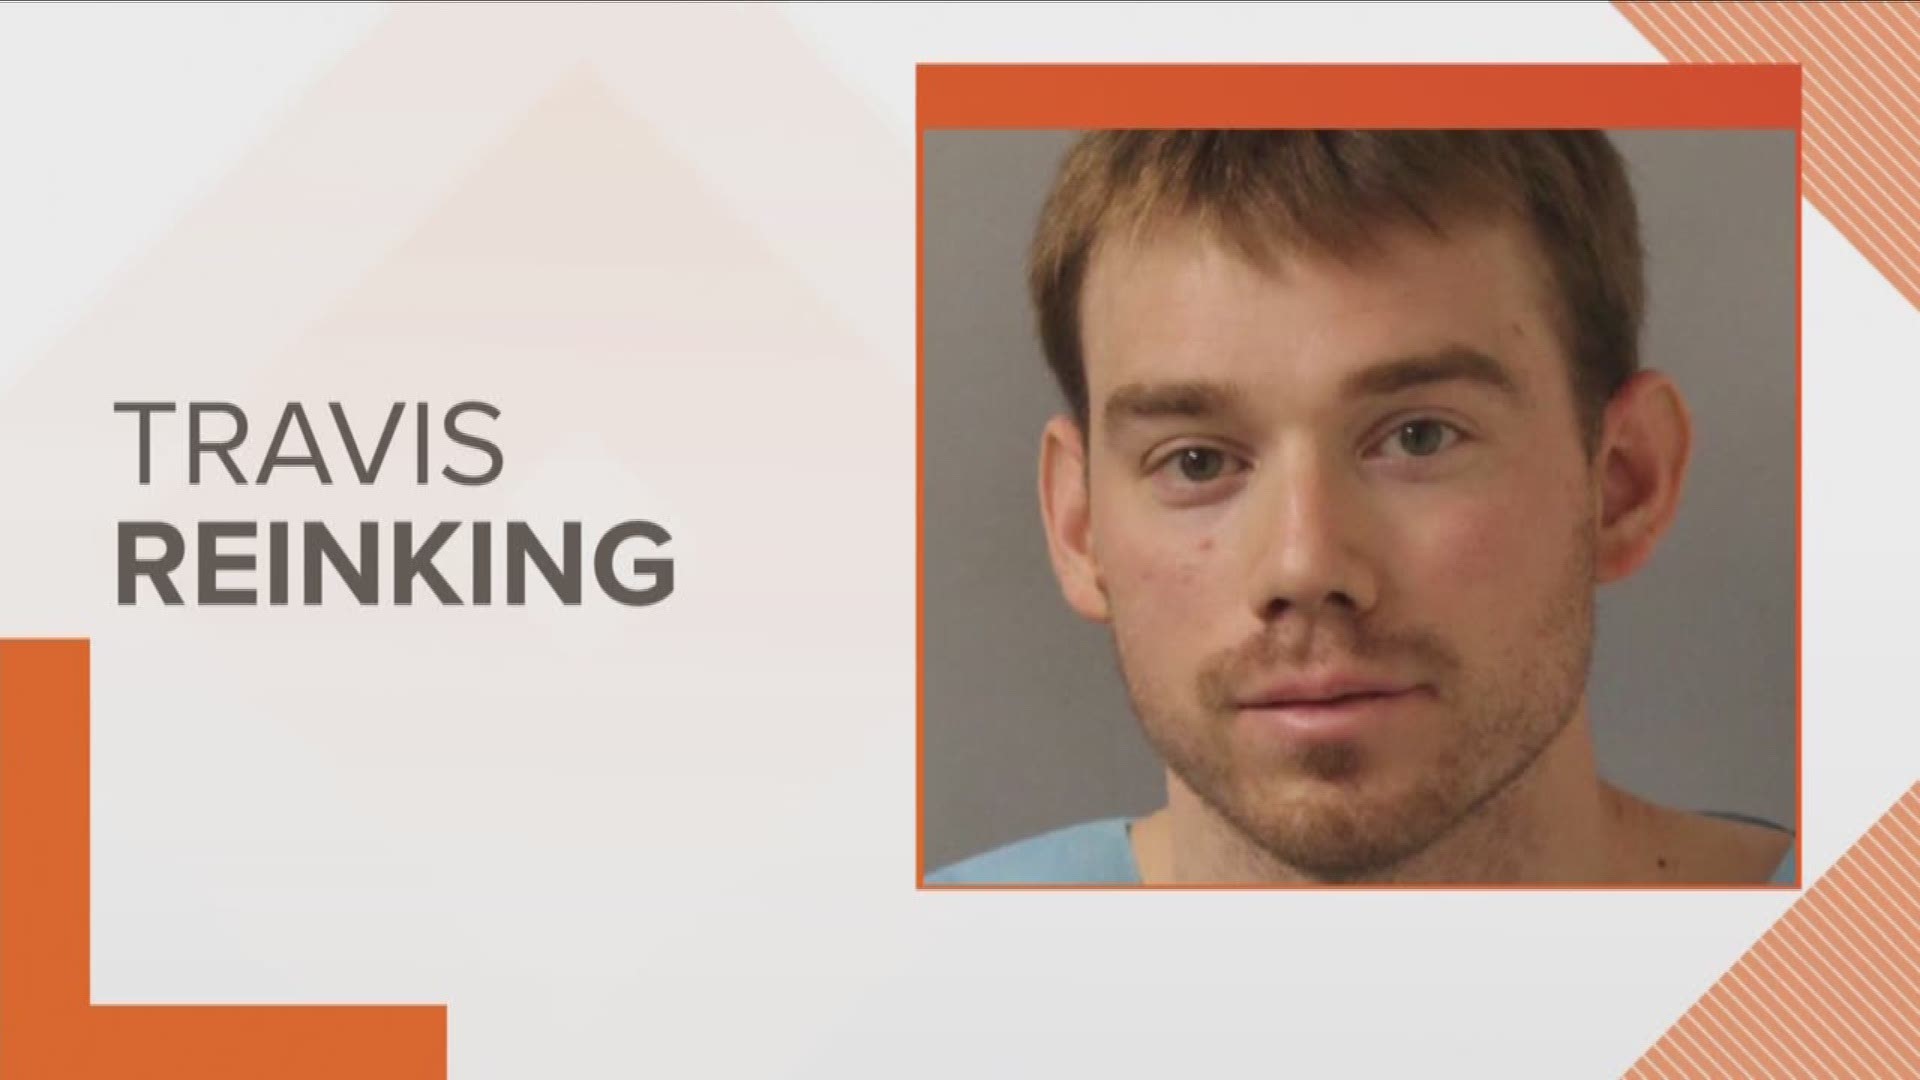 Reinking was scheduled to appear in court Friday, but did not because his public defender said a mental health evaluation is still underway.